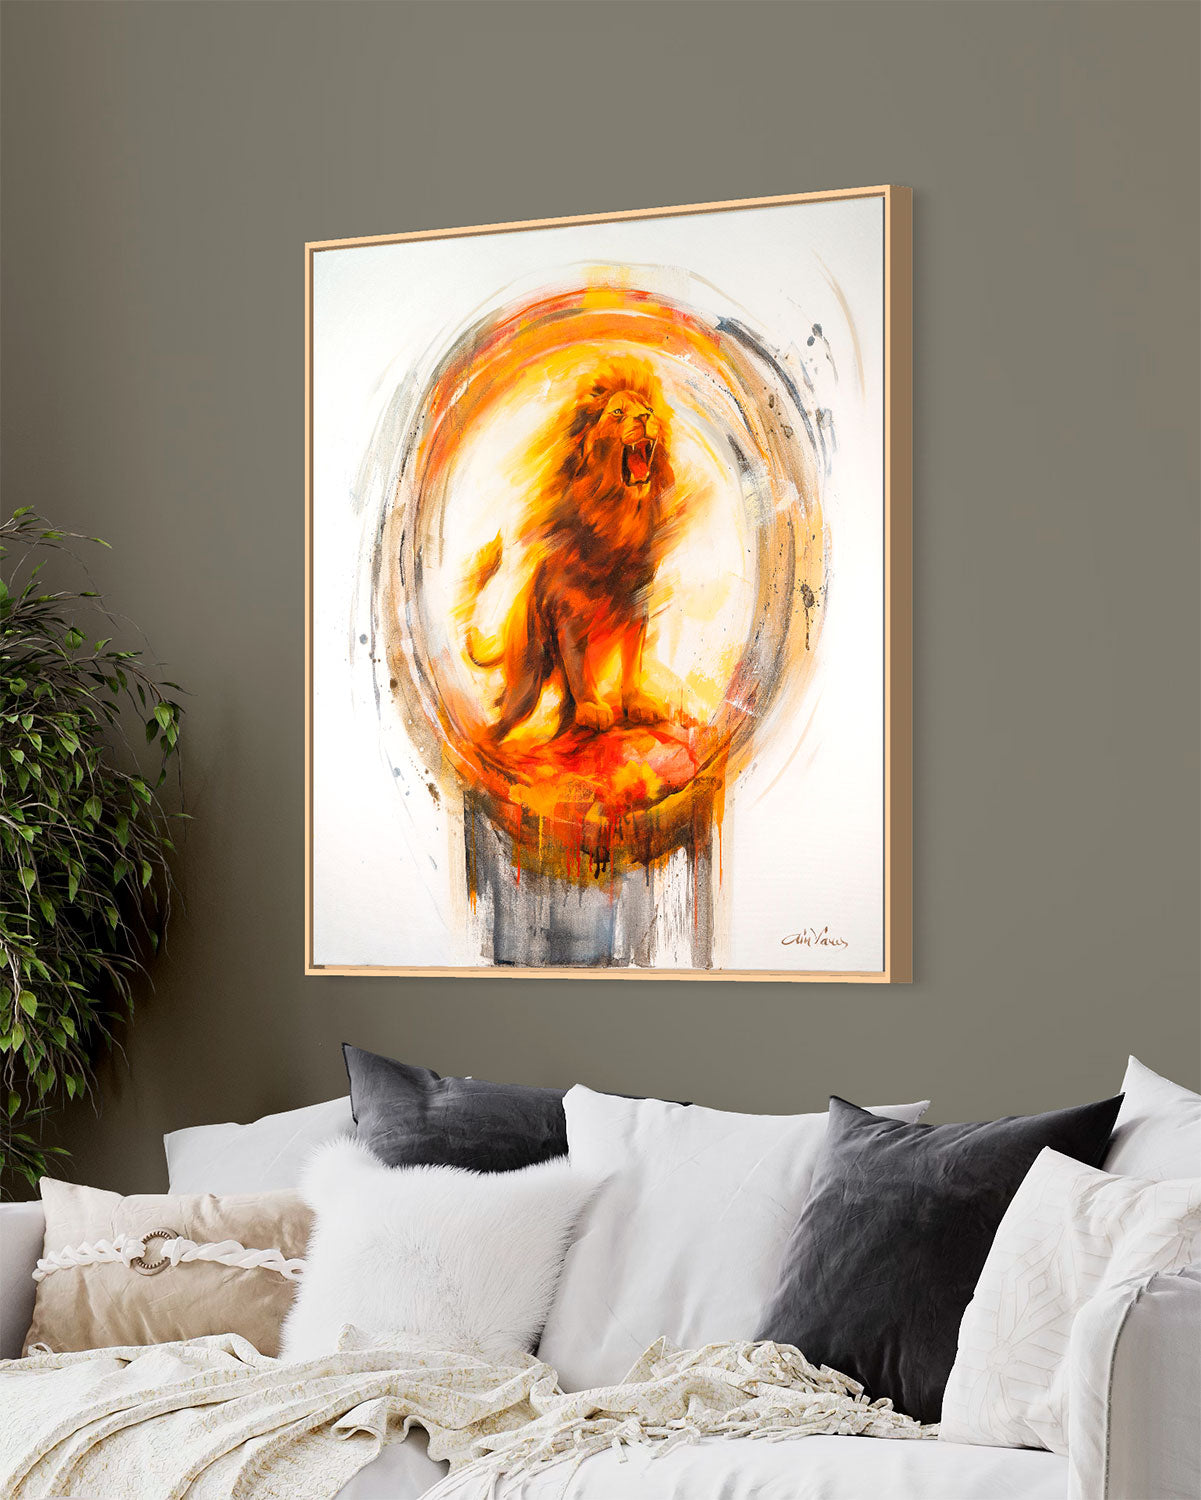 Prophetic Art Print "The Lord roars over his people", Isaiah 61:3, Revelation 5:5, Ain Vares Art